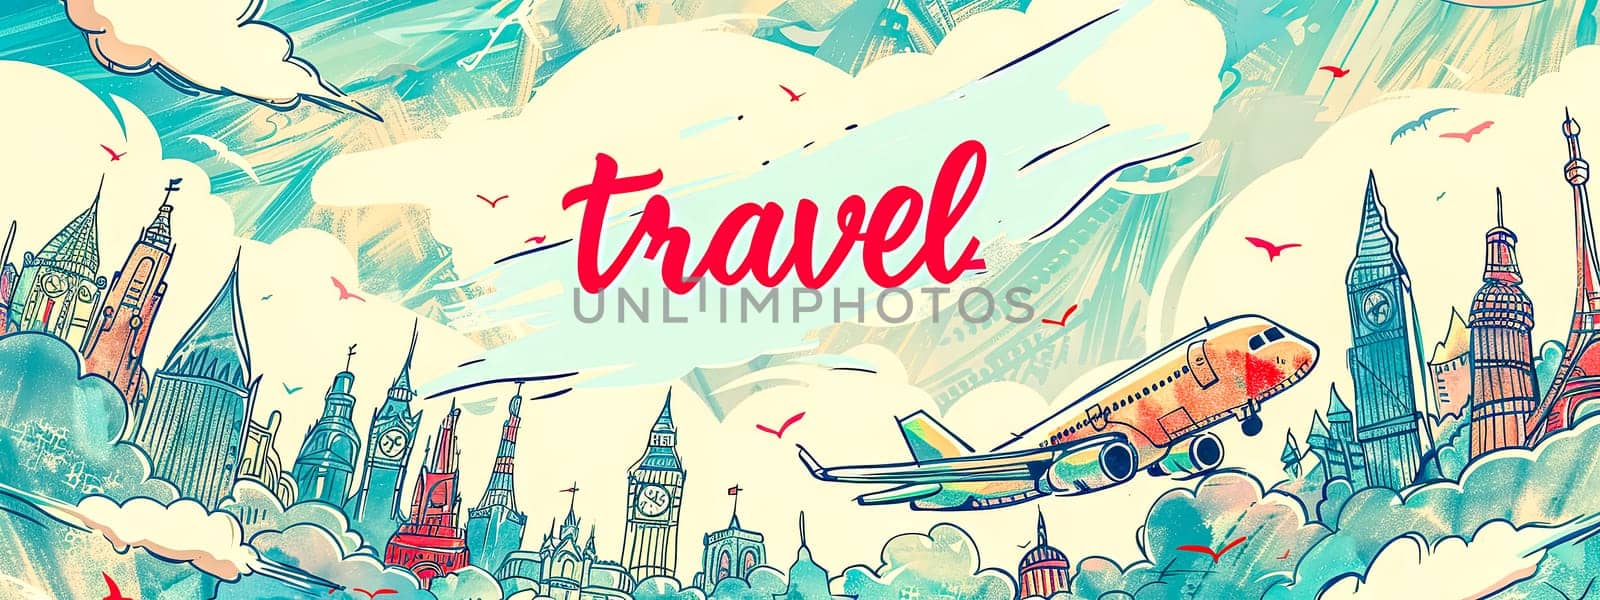 Colorful illustration of world landmarks with a plane and travel text